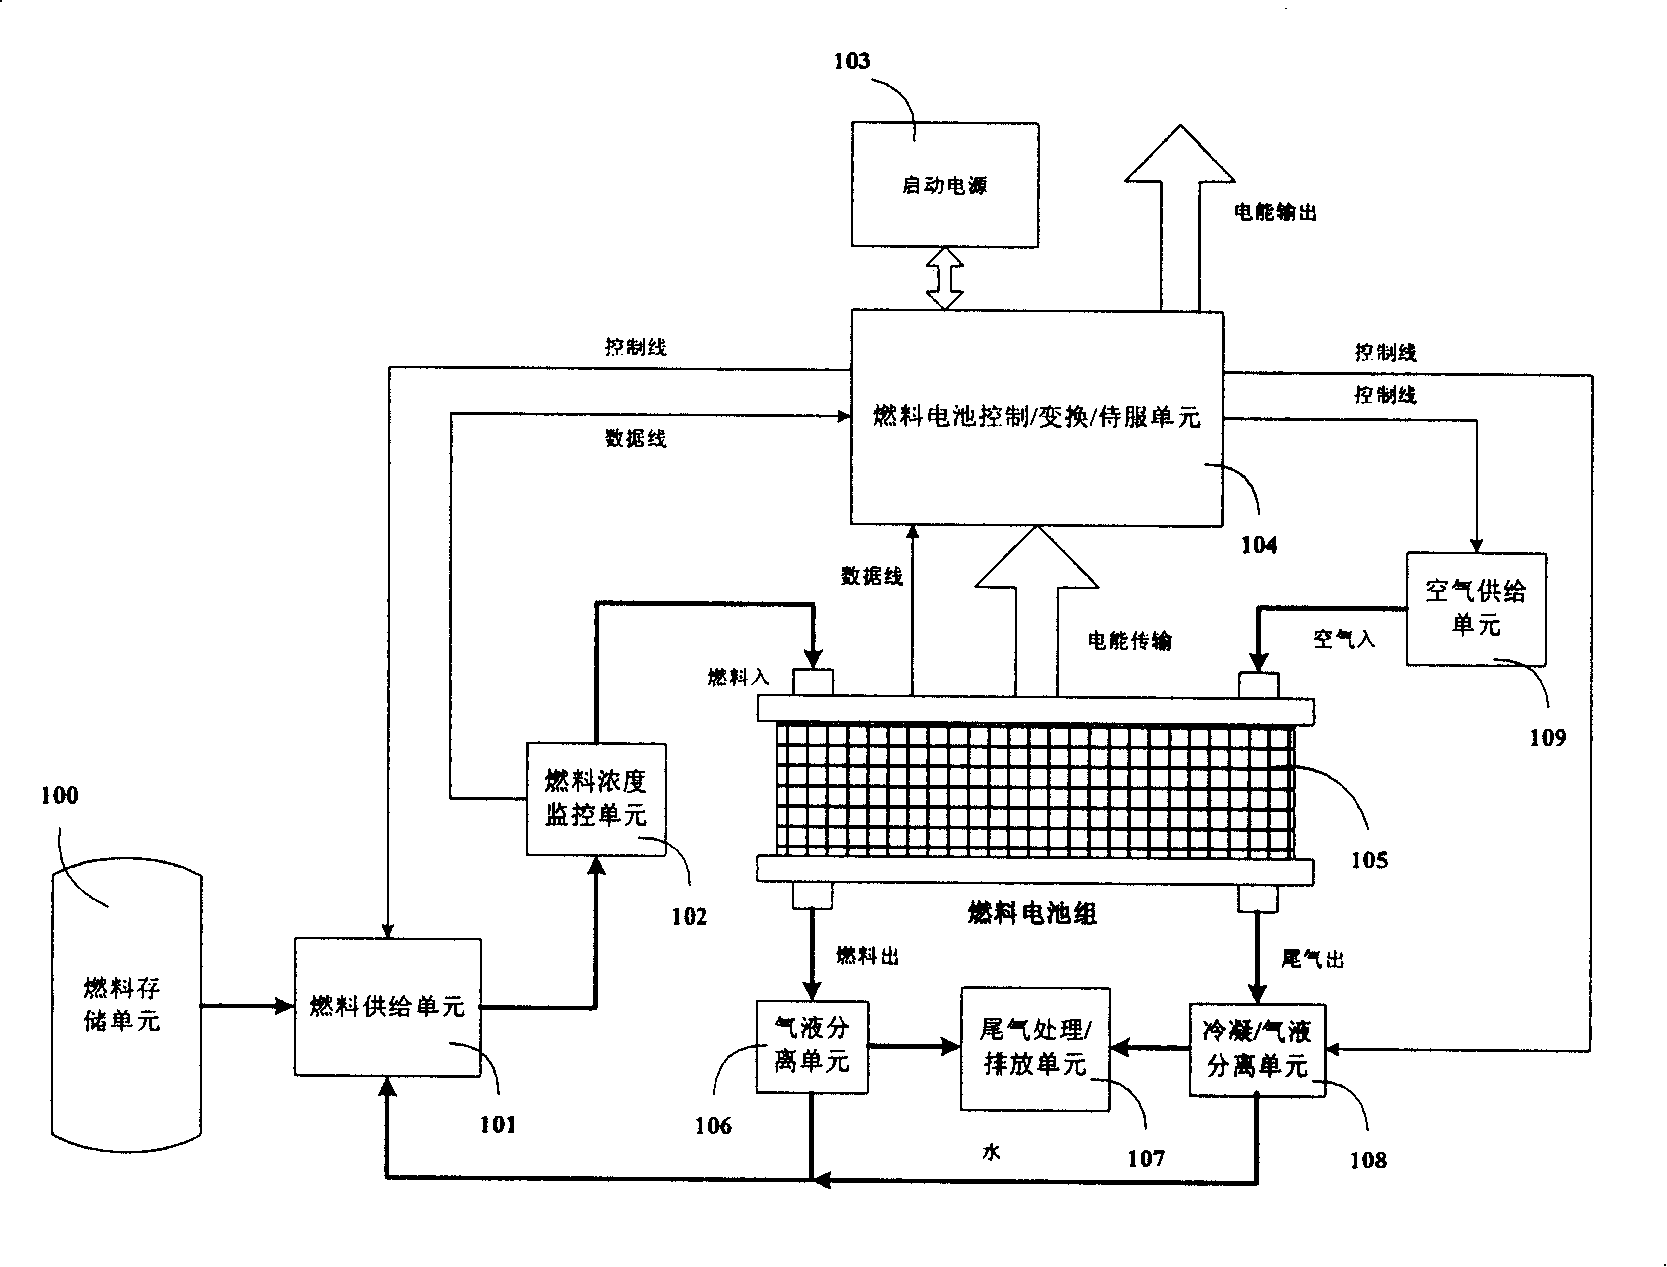 Portable apparatus fuel battery system and its operation method